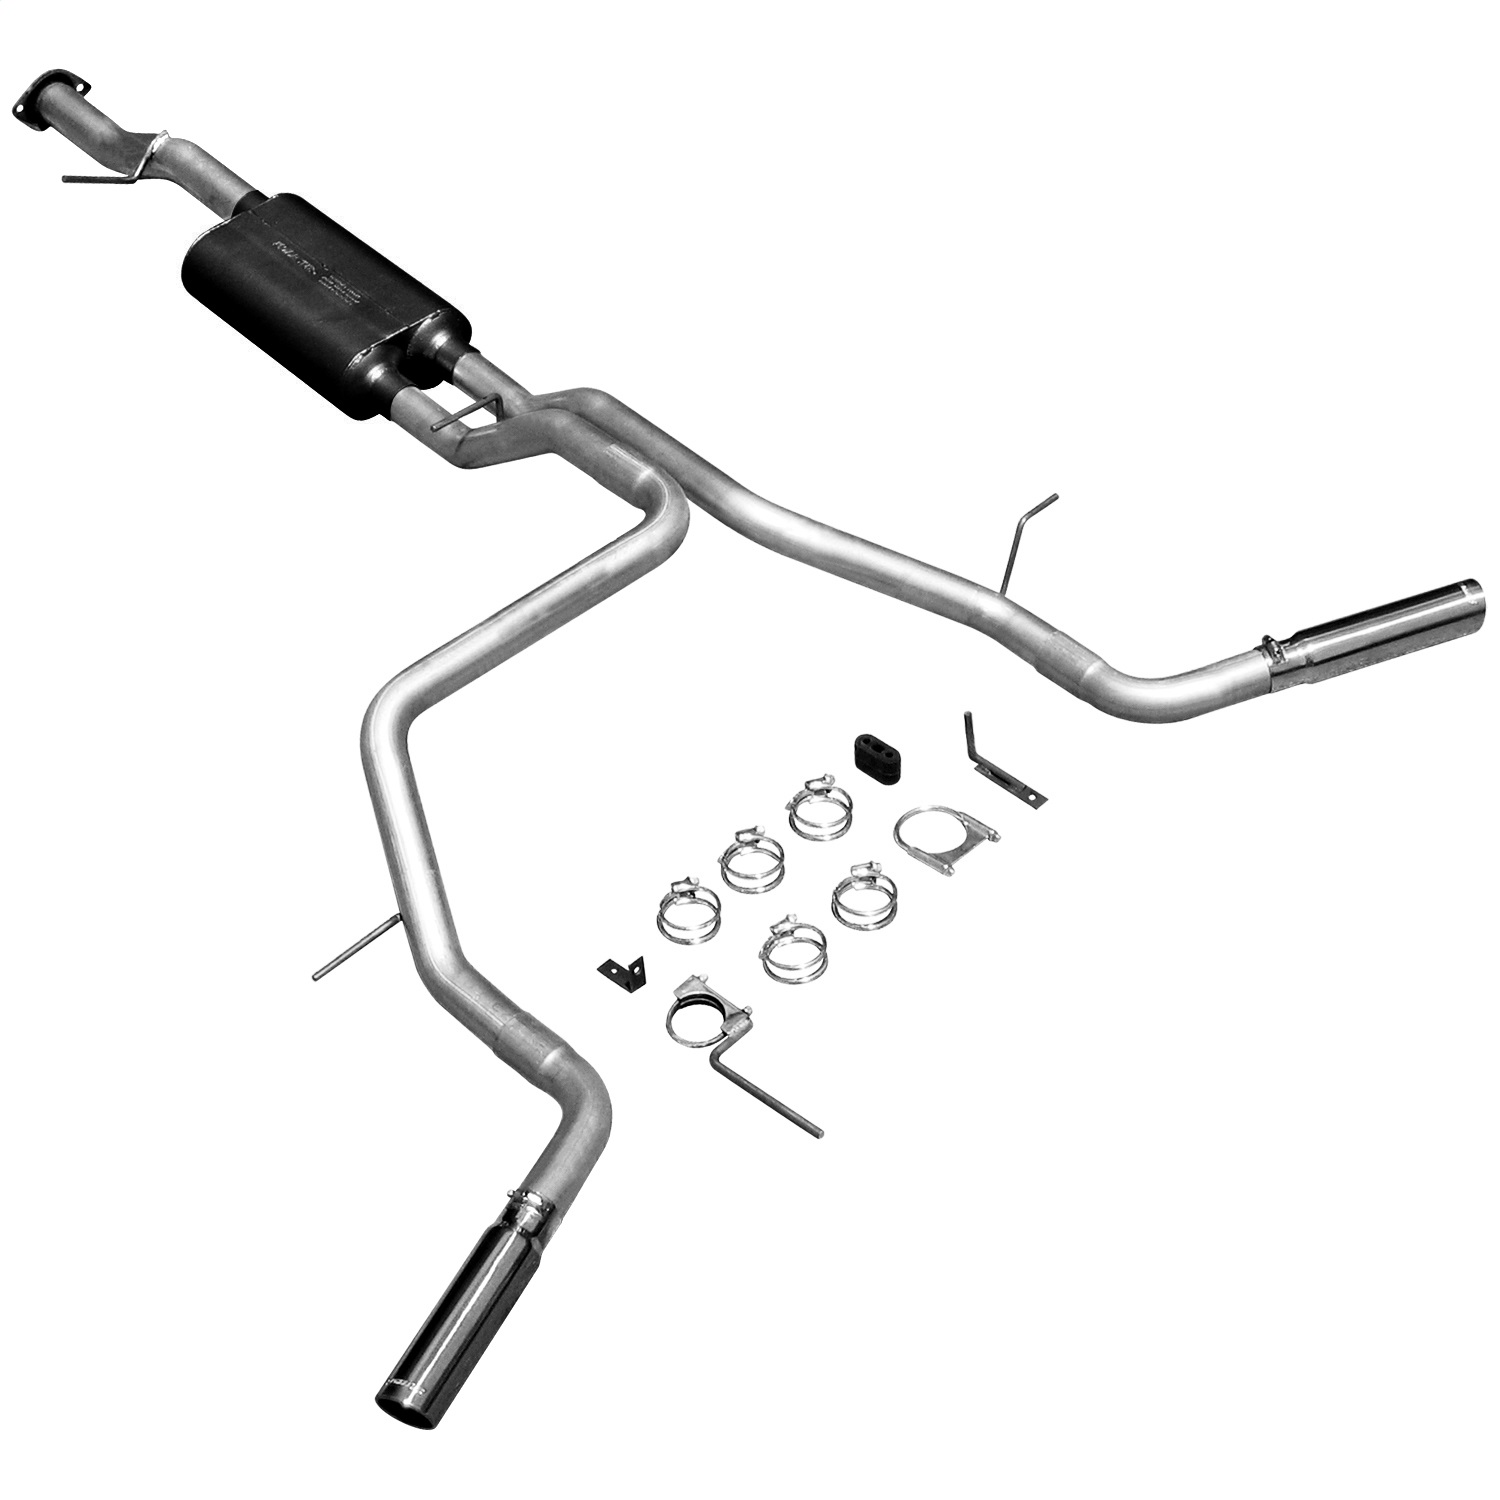 Flowmaster Flowmaster 17430 American Thunder Cat Back Exhaust System Fits 07-08 Tahoe Yukon